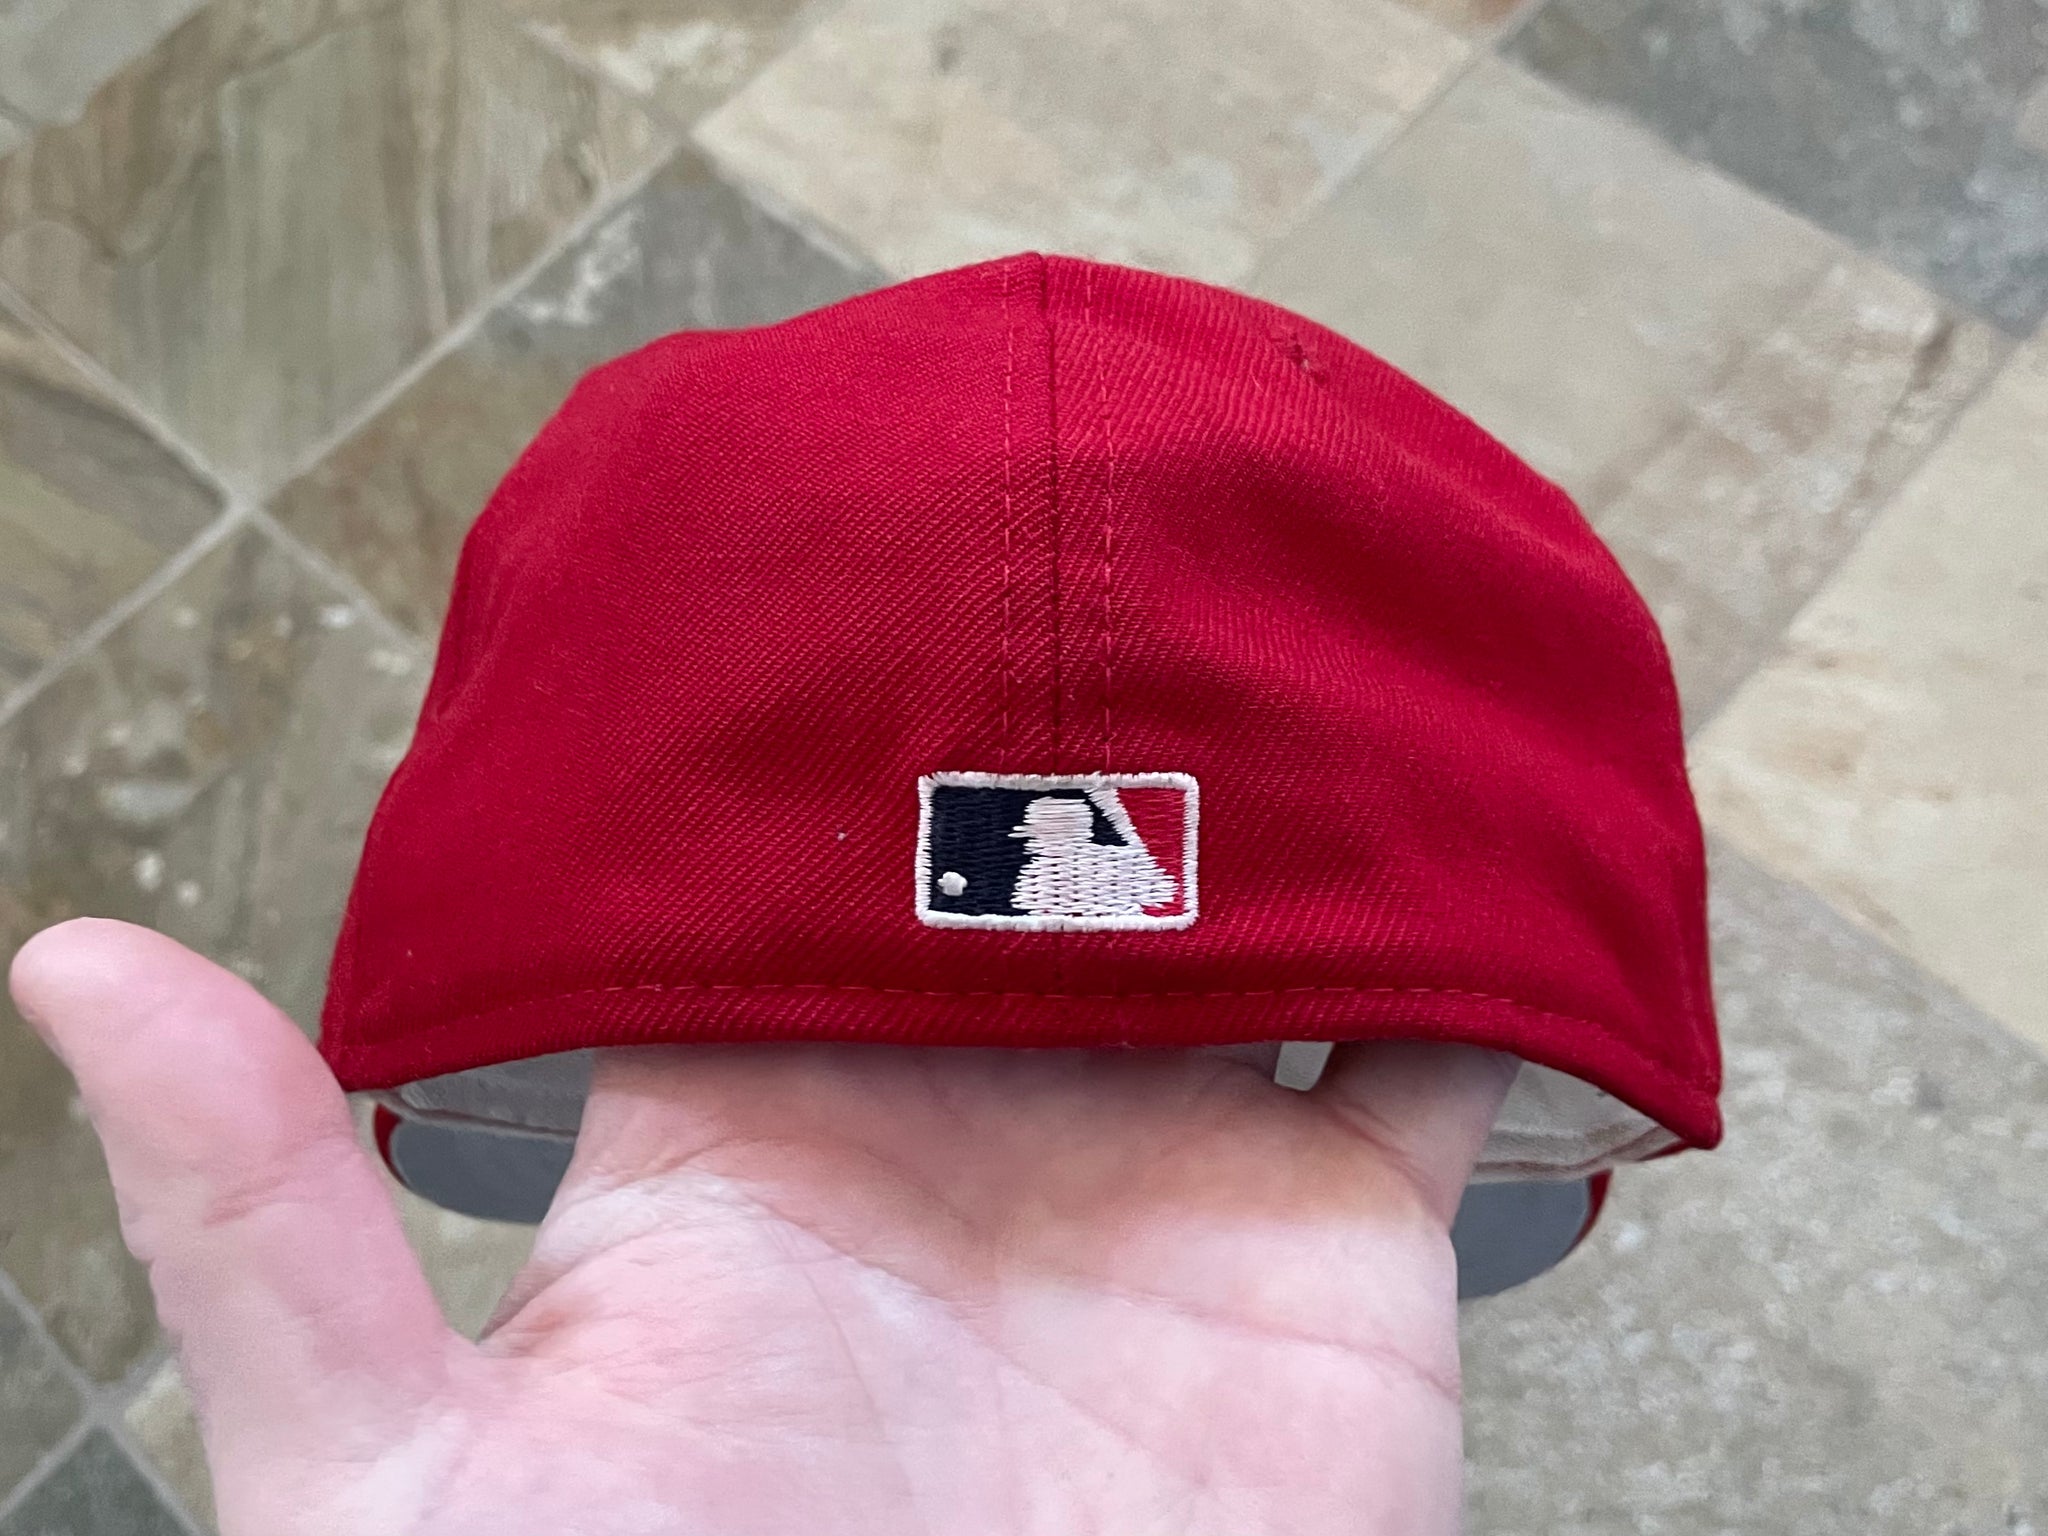 Stuck St. The – Cardinals Vintage New Diamond Fitted Base Era Sports Collection Pro 90s In Louis